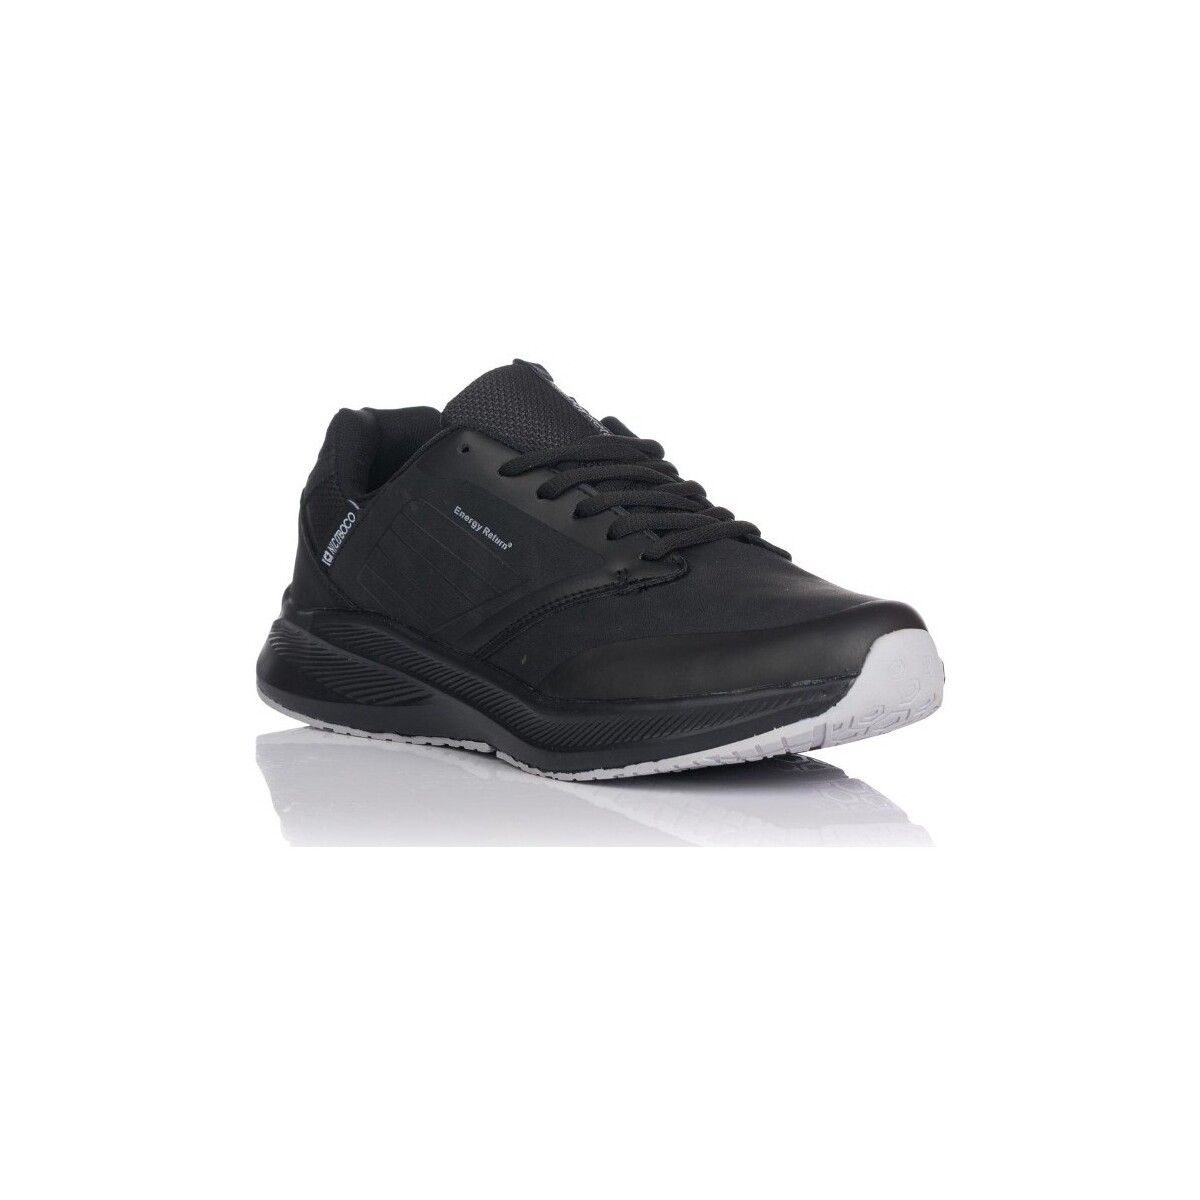 Chaussures Homme Fitness / Training Nicoboco 37-307 Noir